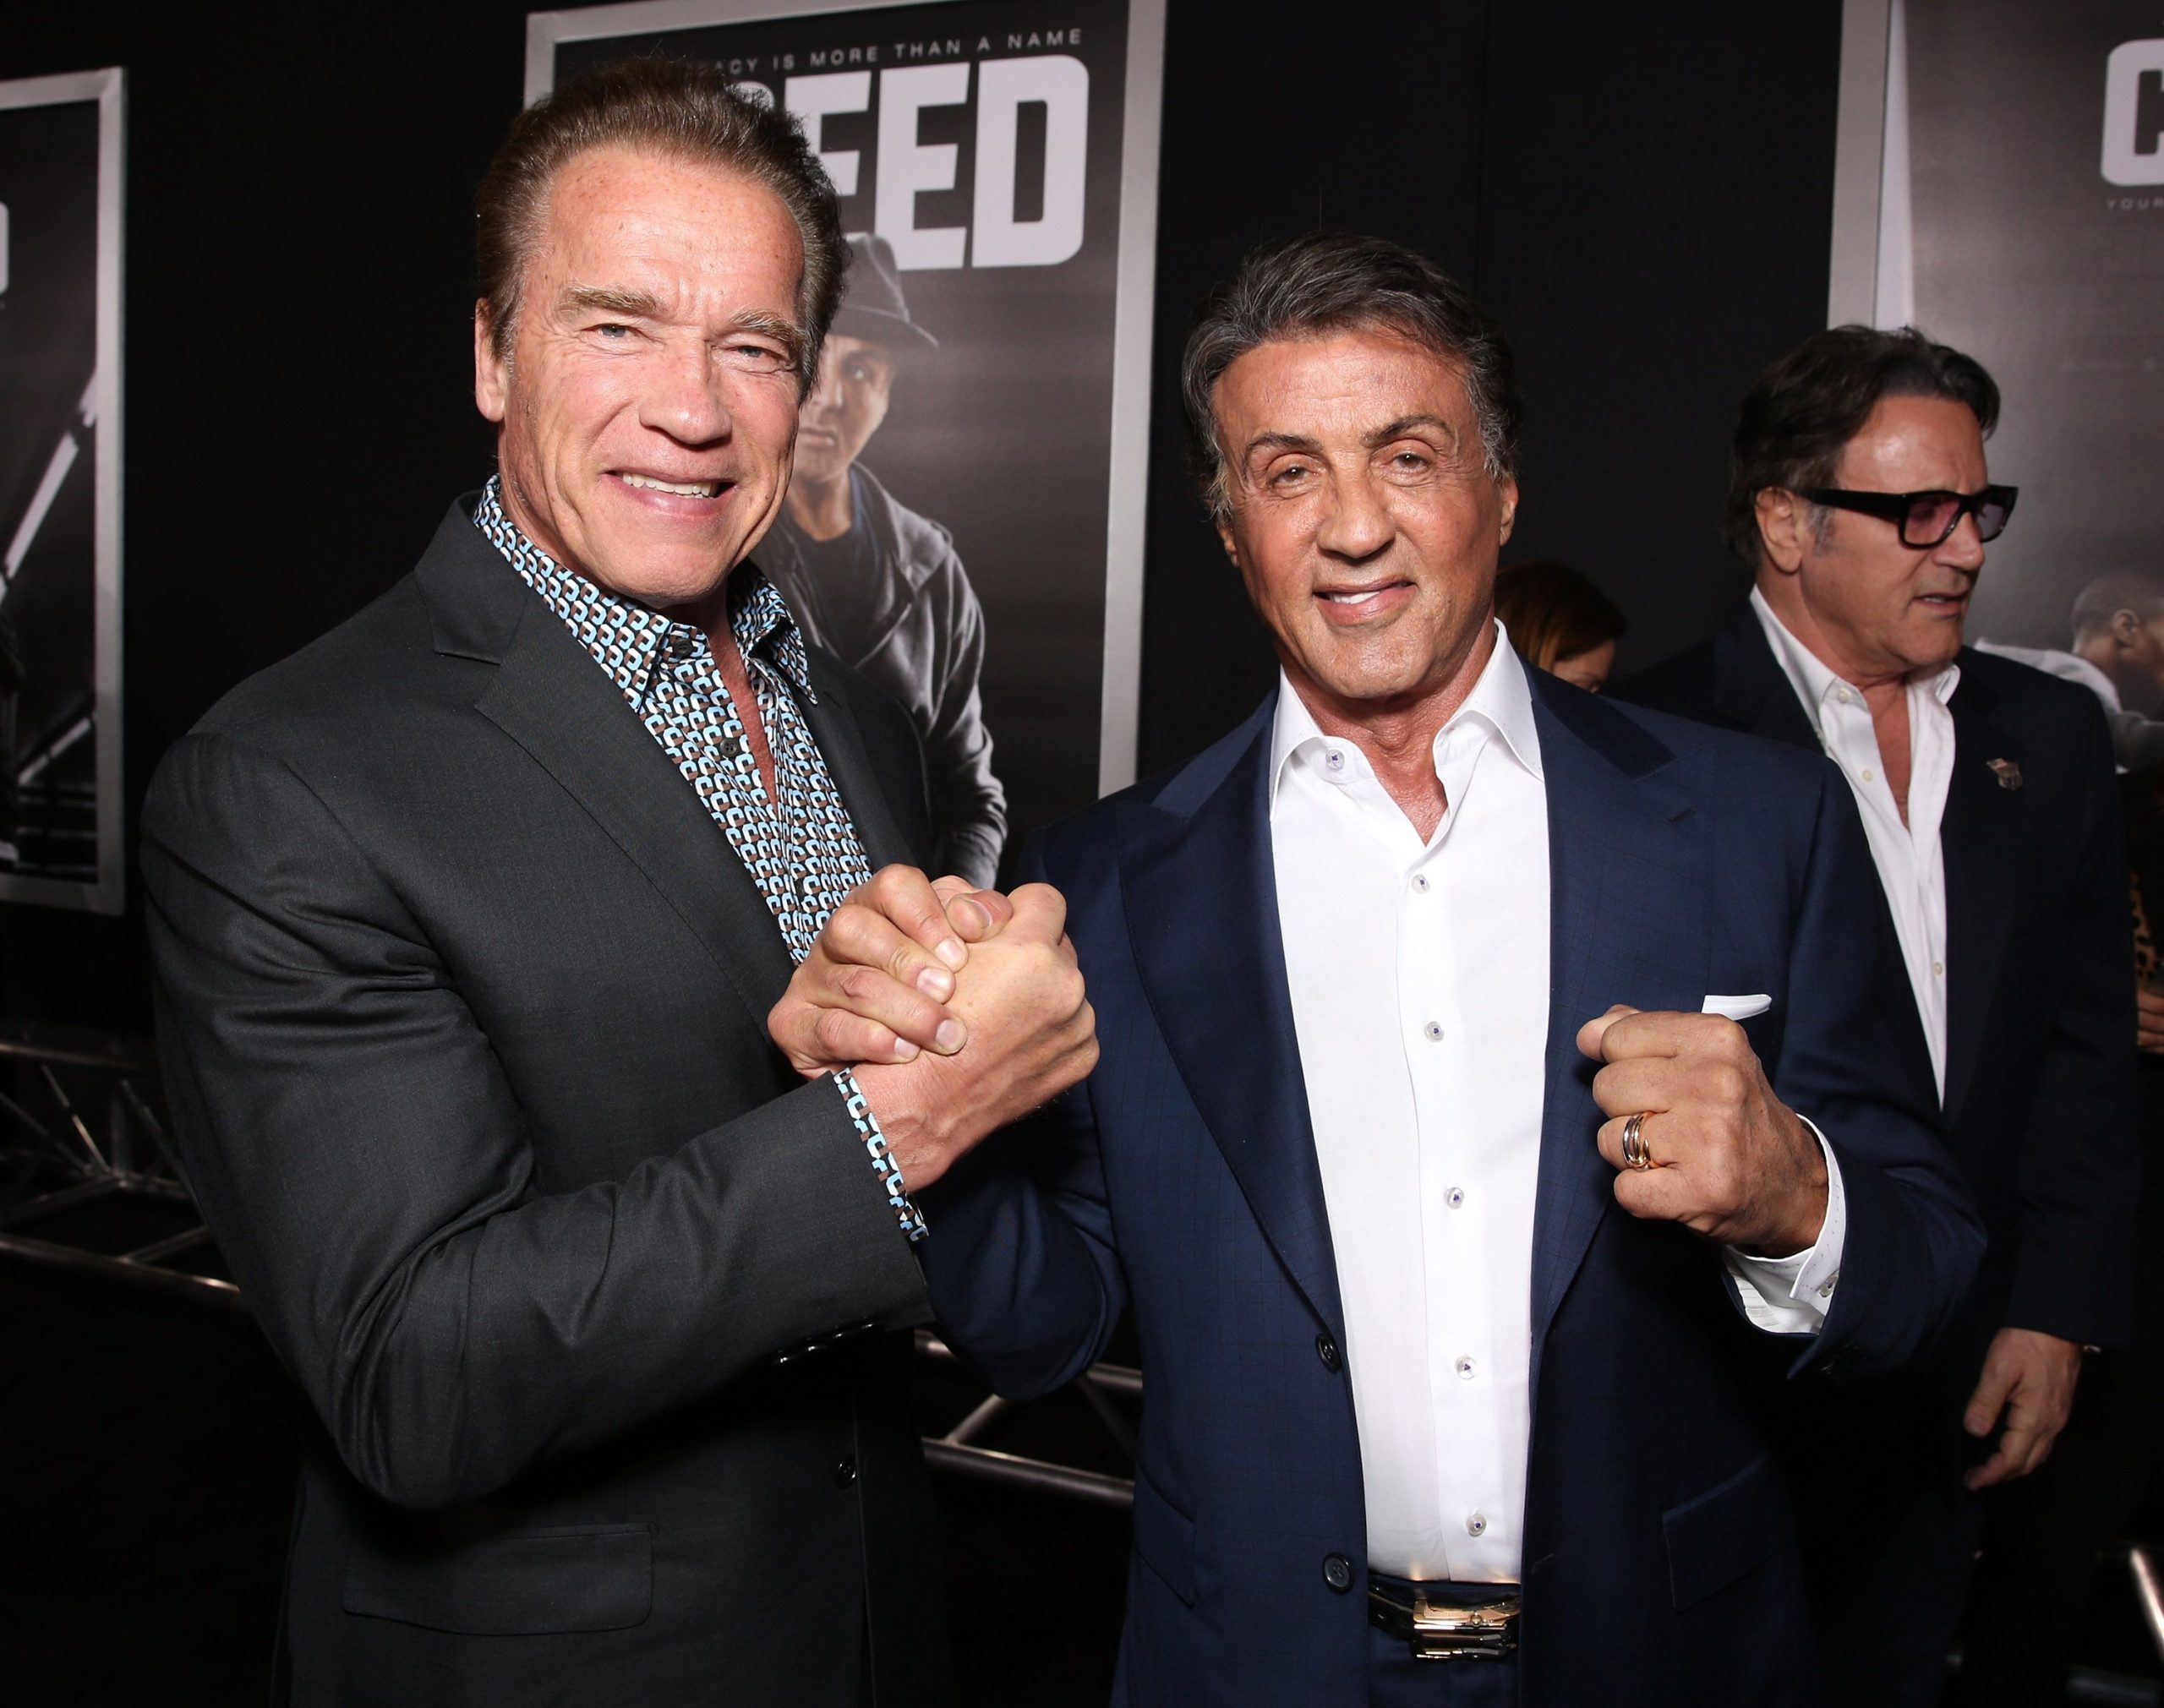 Arnold at Stallone's movie premiere.